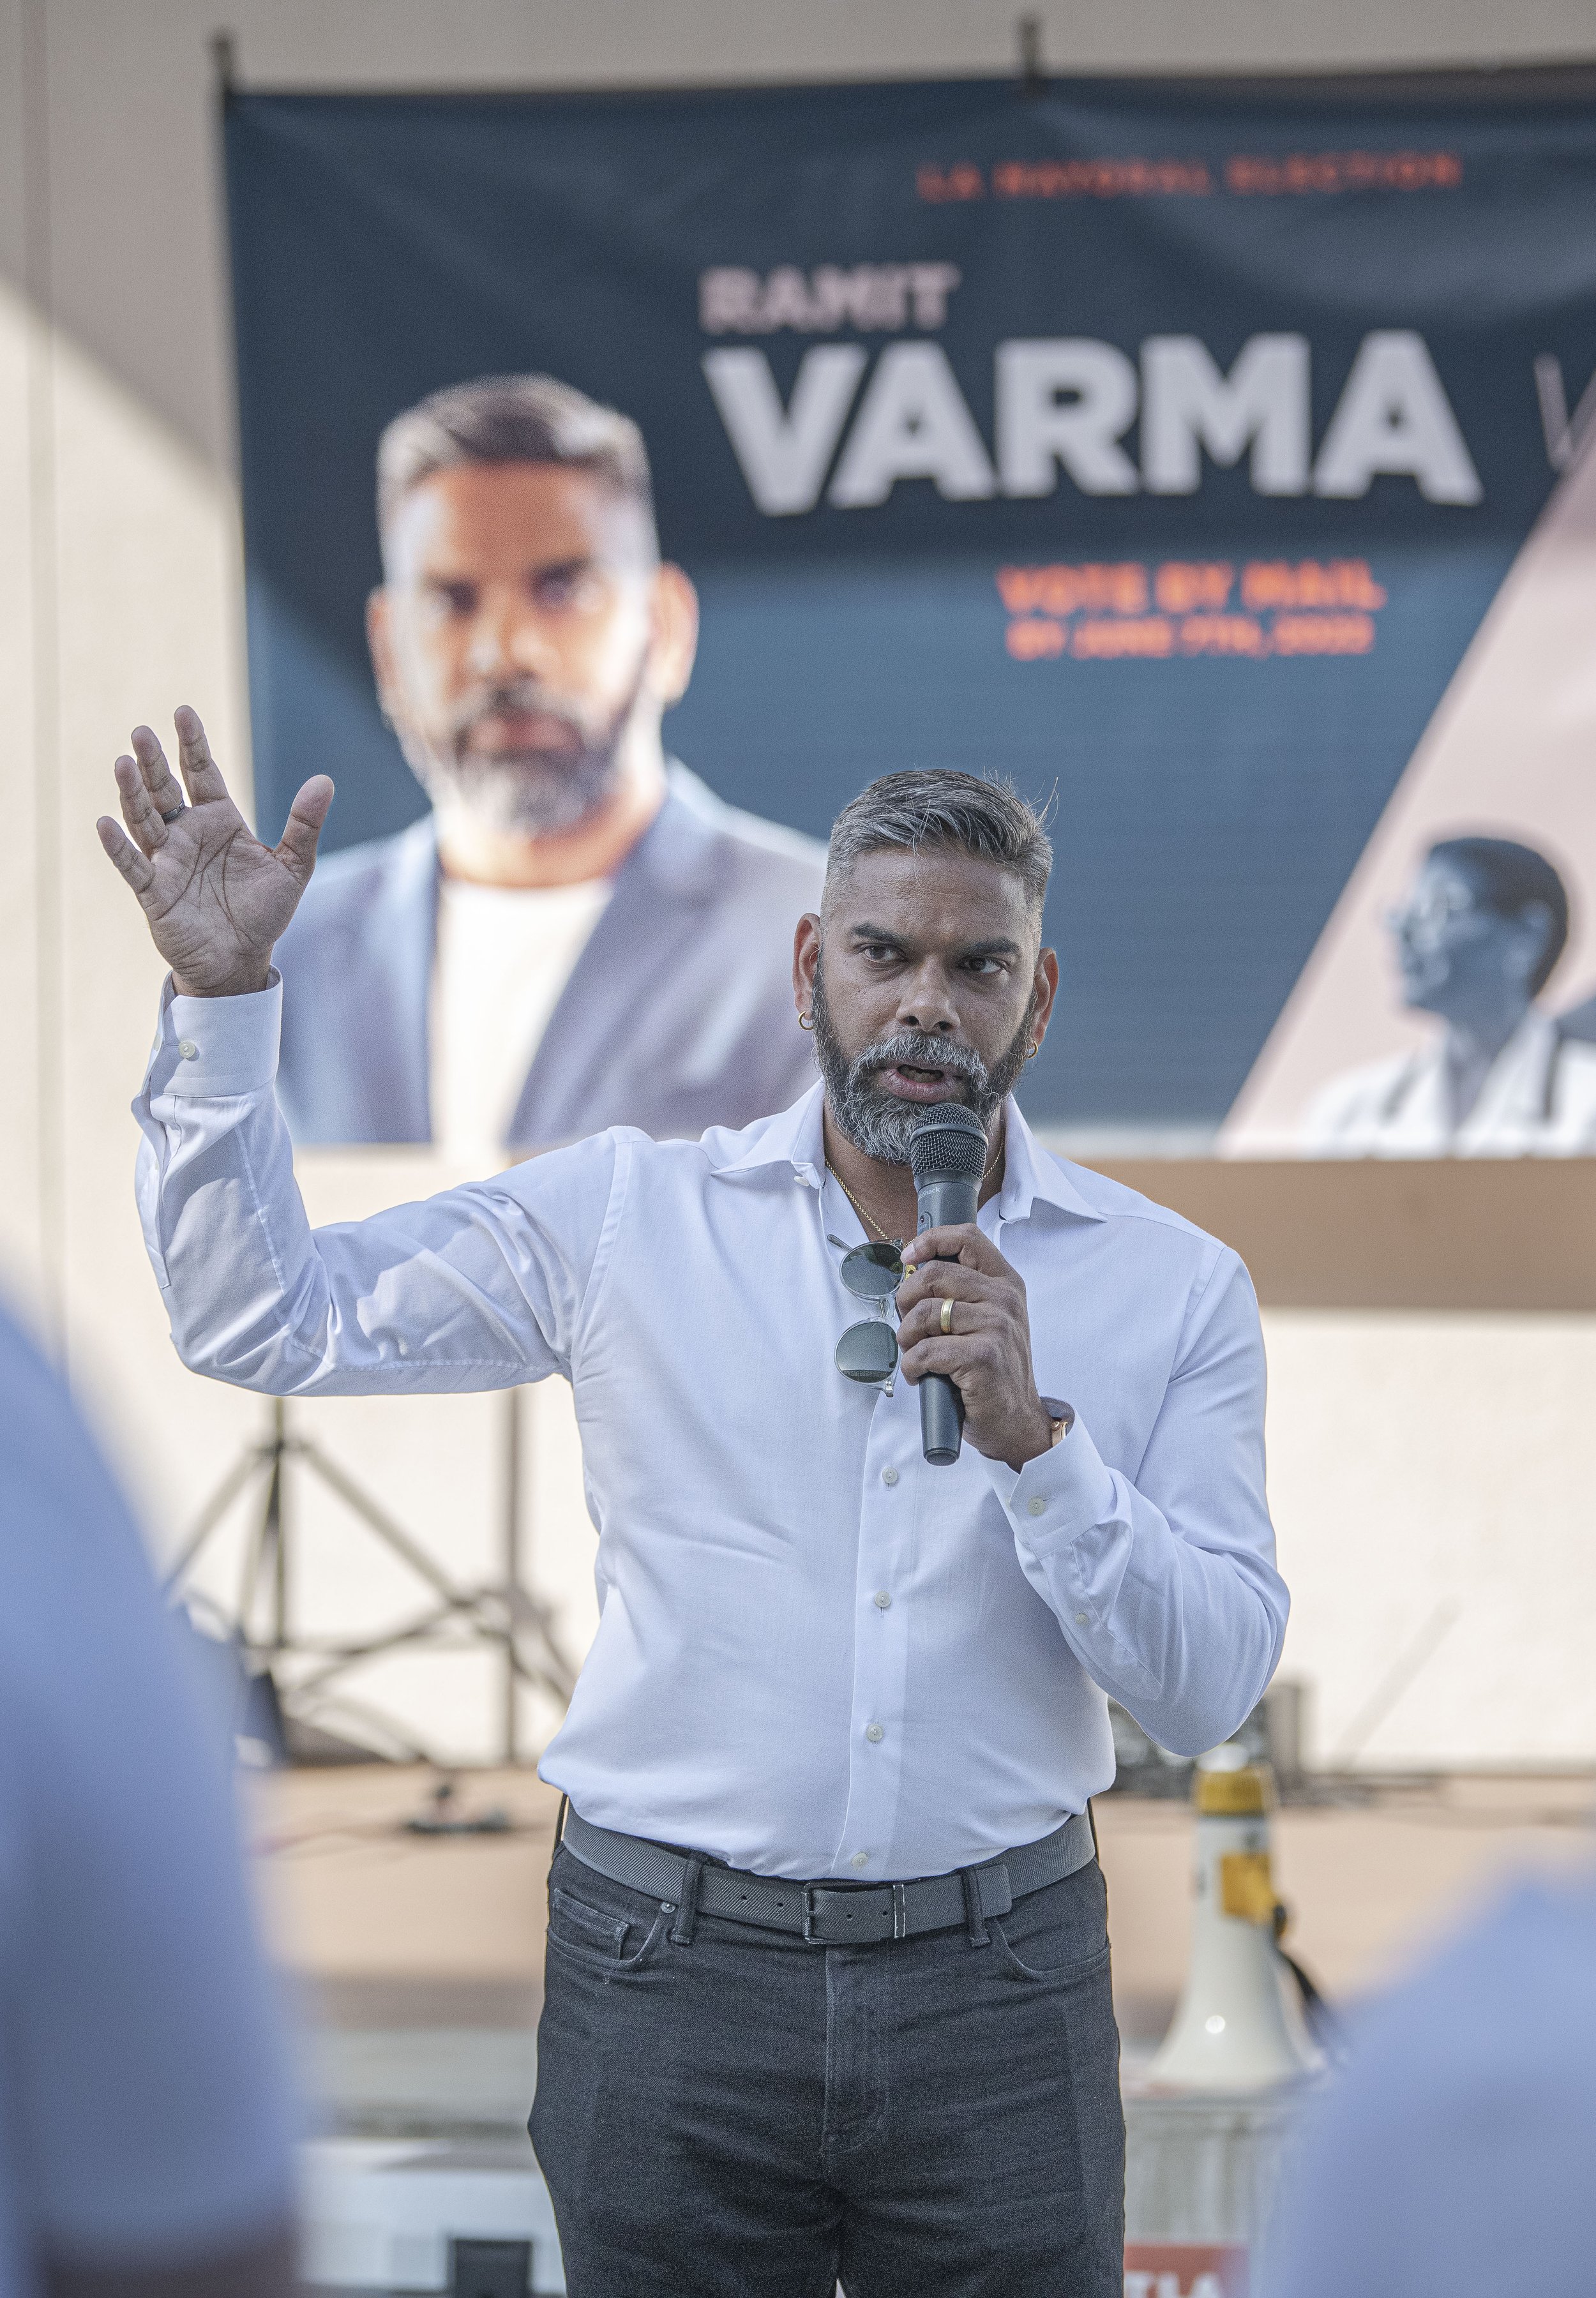  Ramit Varma a candidate for the 2022 Los Angeles Mayoral debate campaigns outside the doors of the debate in which he was not invited to on Sunday May 1, 2022 at the Mayoral debate held at California State University Los Angeles. (Jon Putman | The C